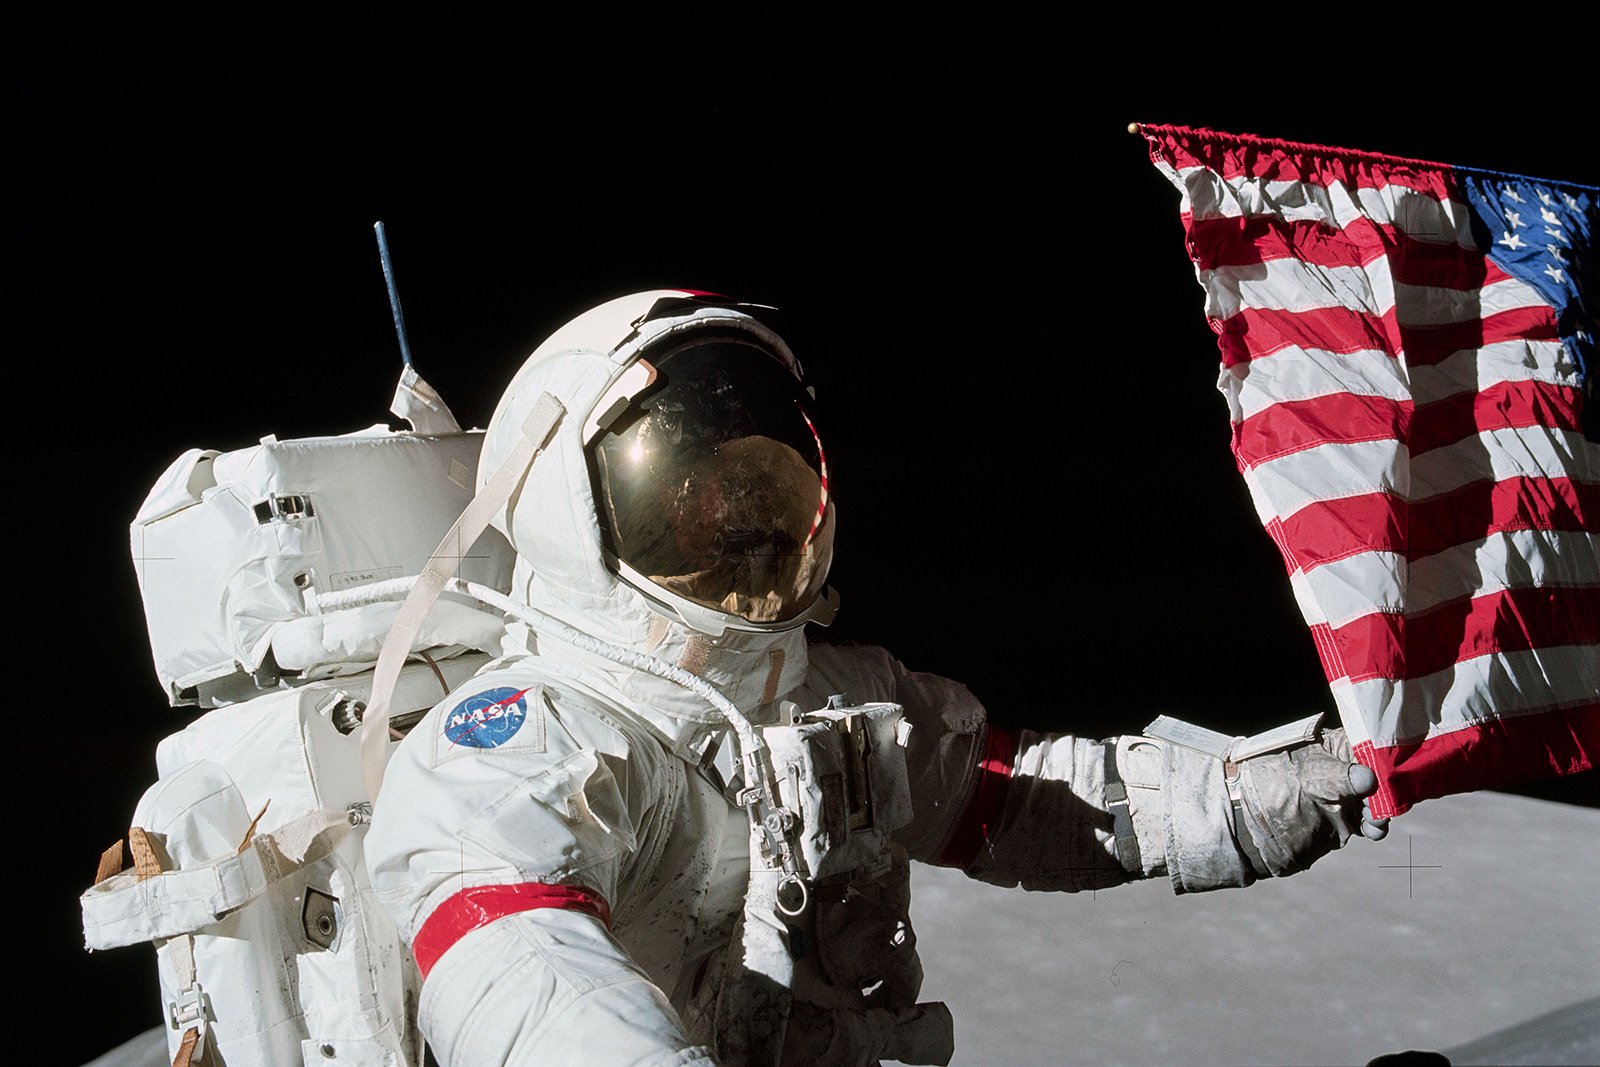 How to take a selfie with American flag as a background on the Moon